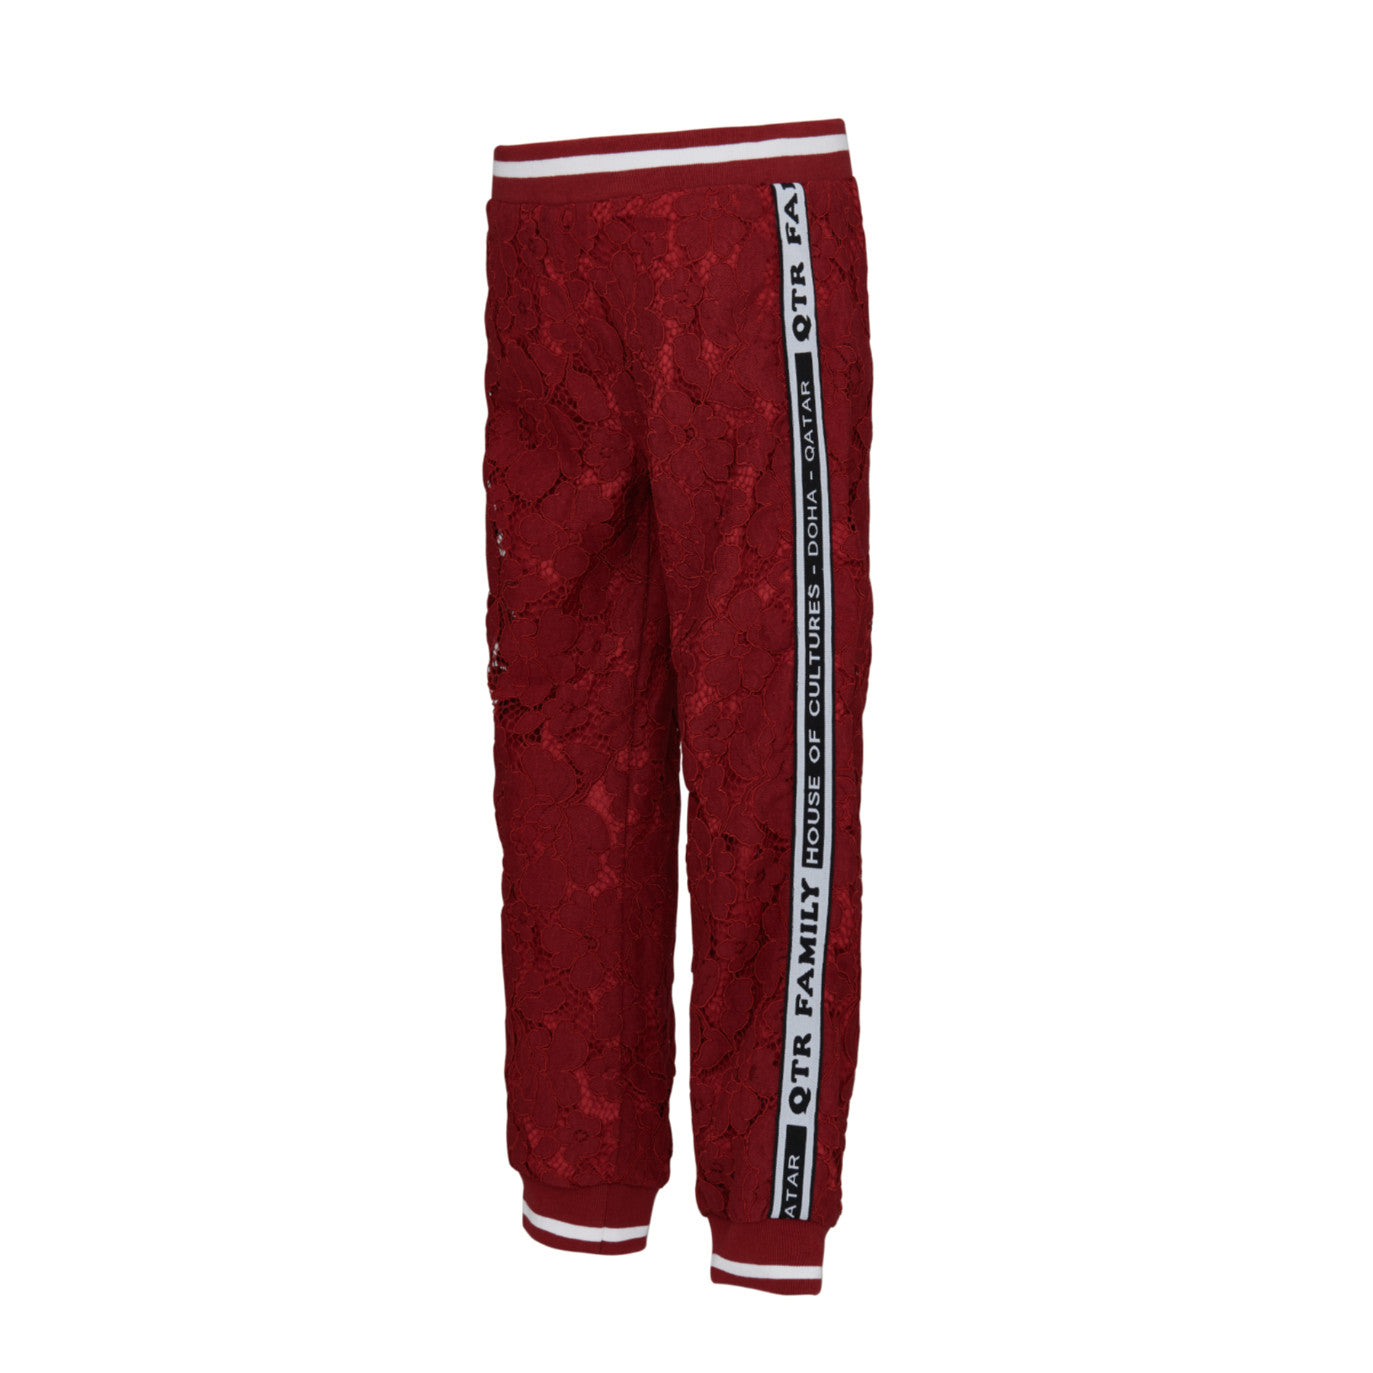 Maroon cotton lace trousers. 20F-146